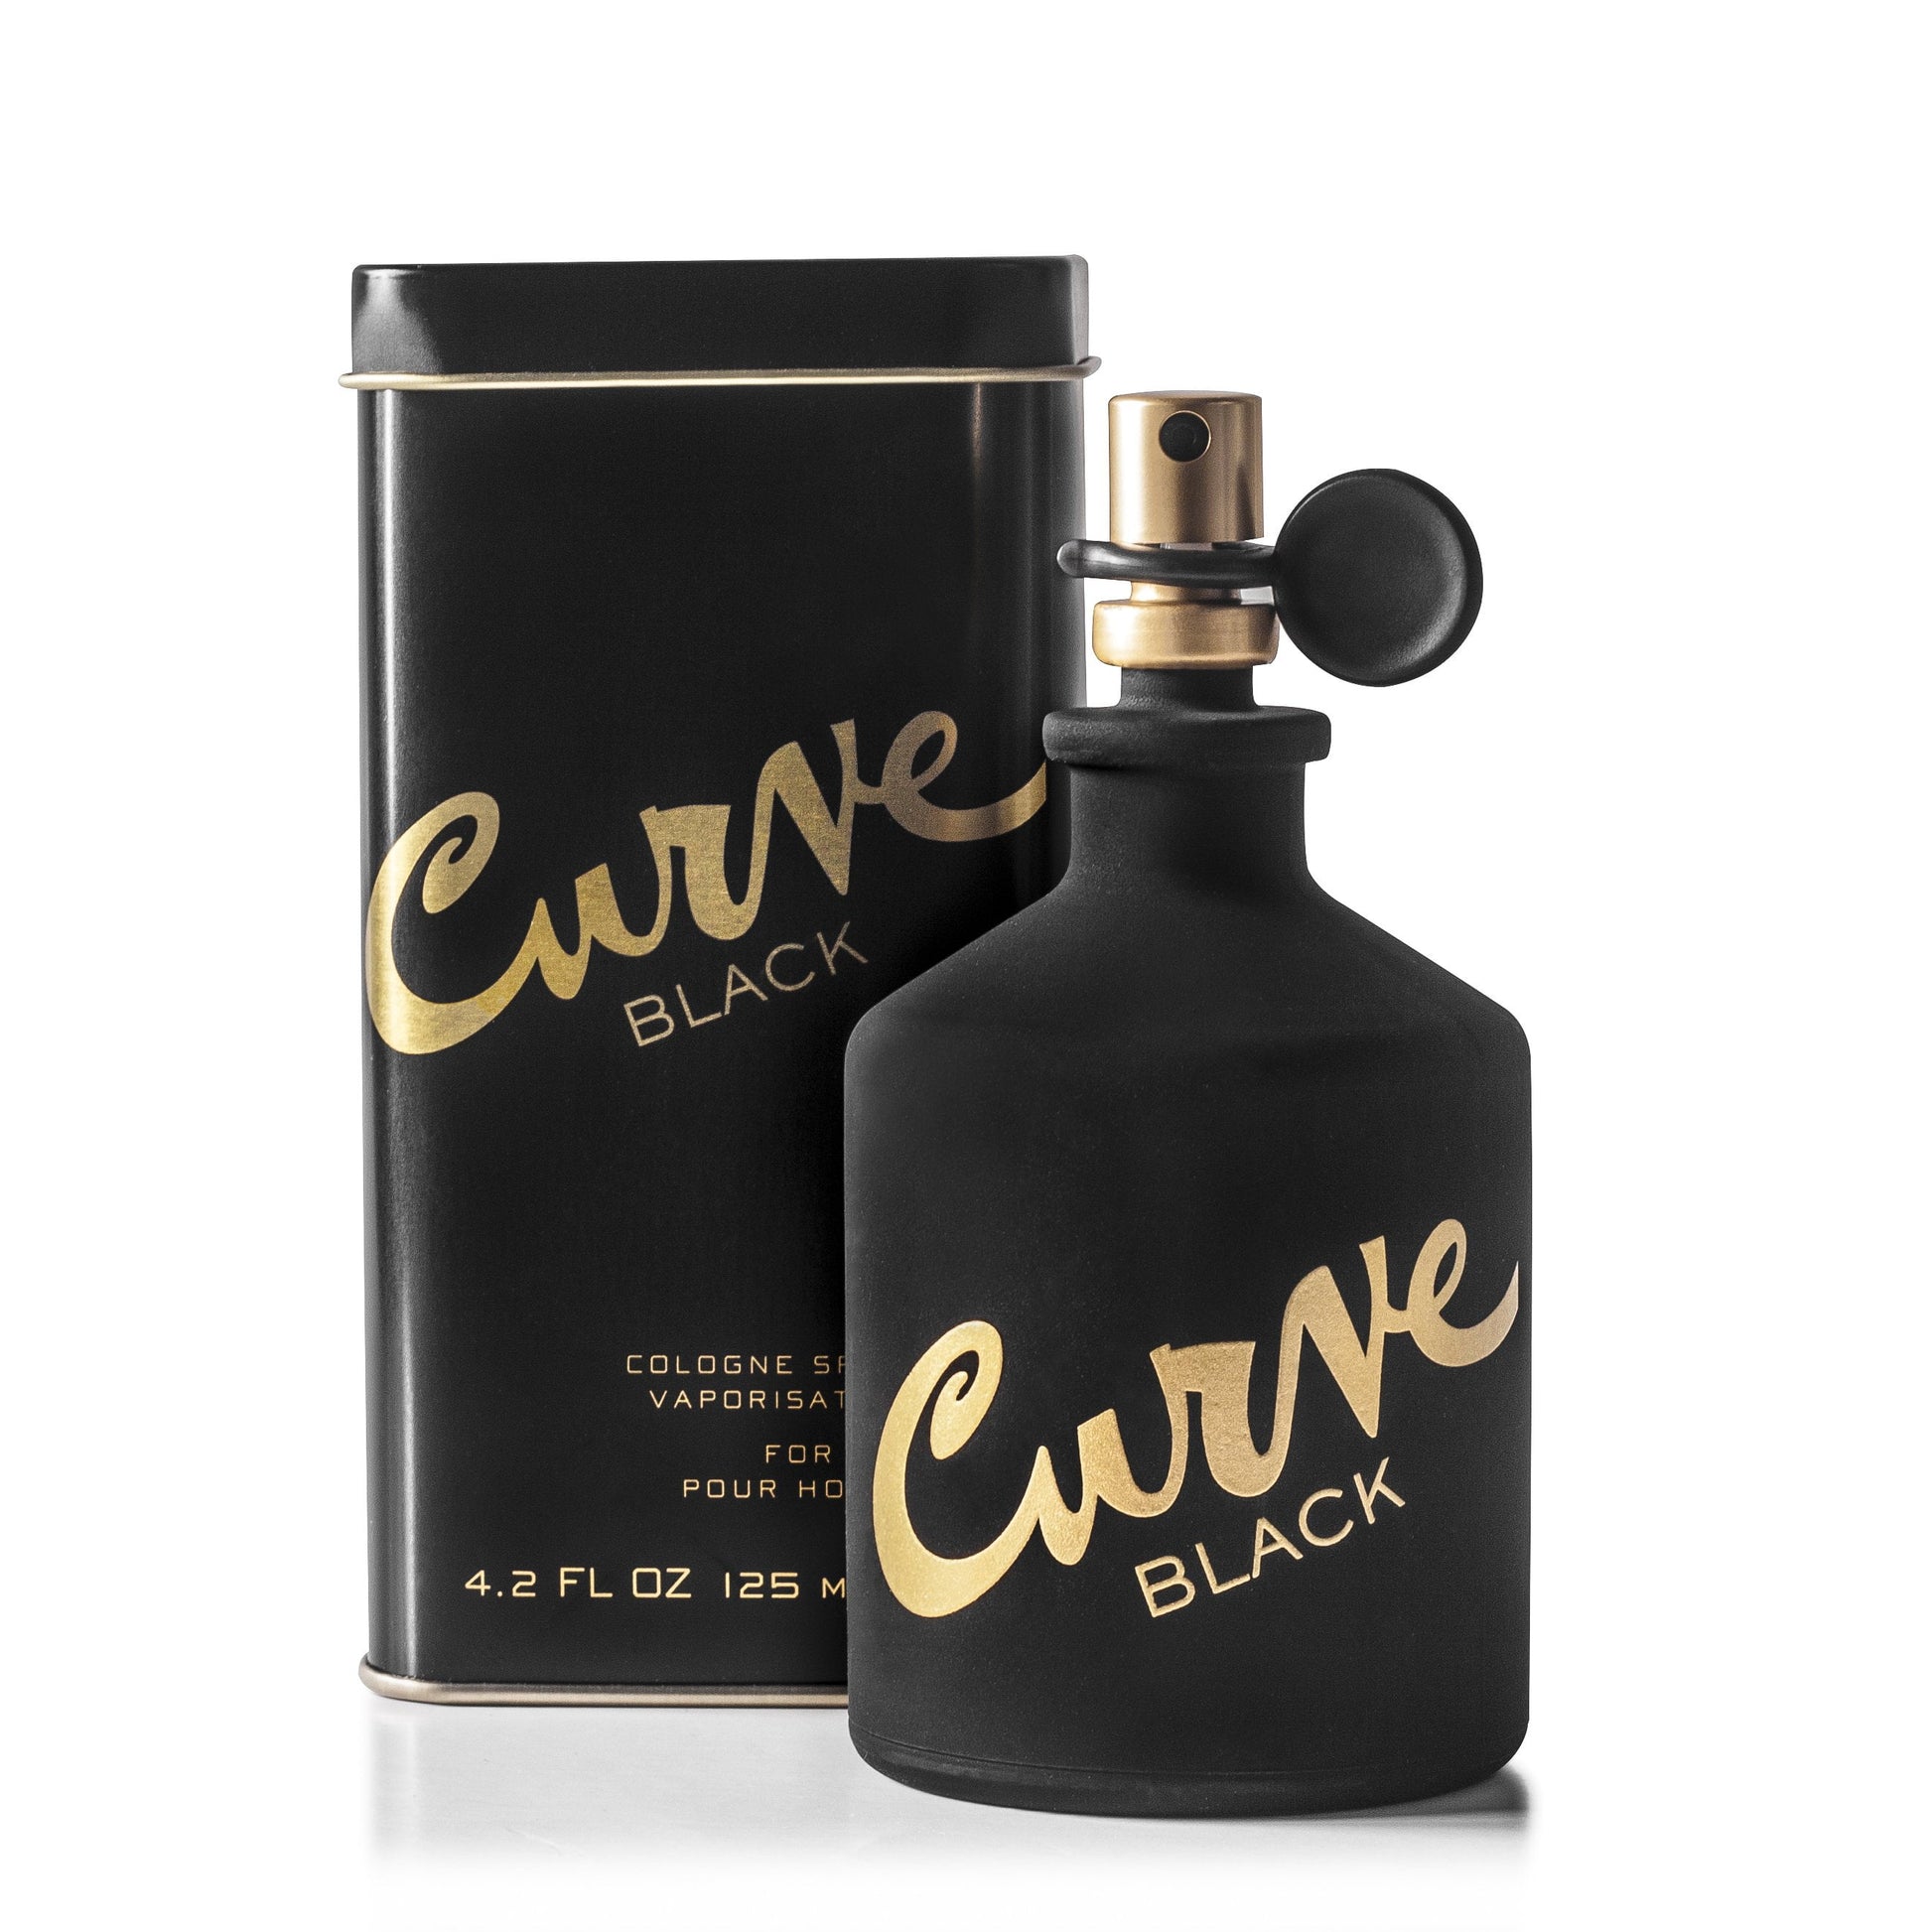 Curve Black Cologne Spray for Men by Claiborne, Product image 1